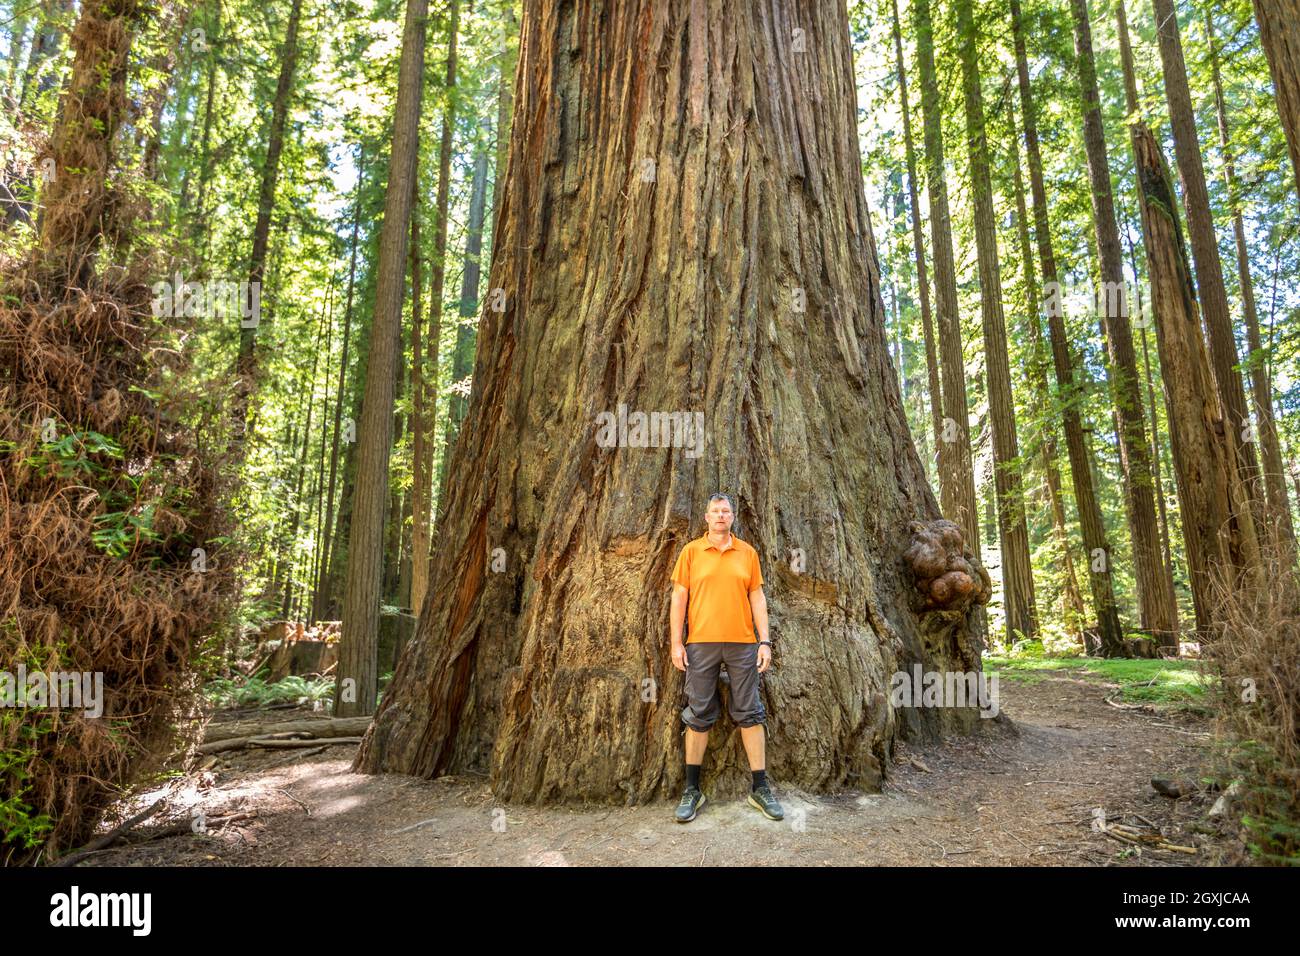 A man in front of a majestic Redwood tree in the Redwood National Park, California Stock Photo